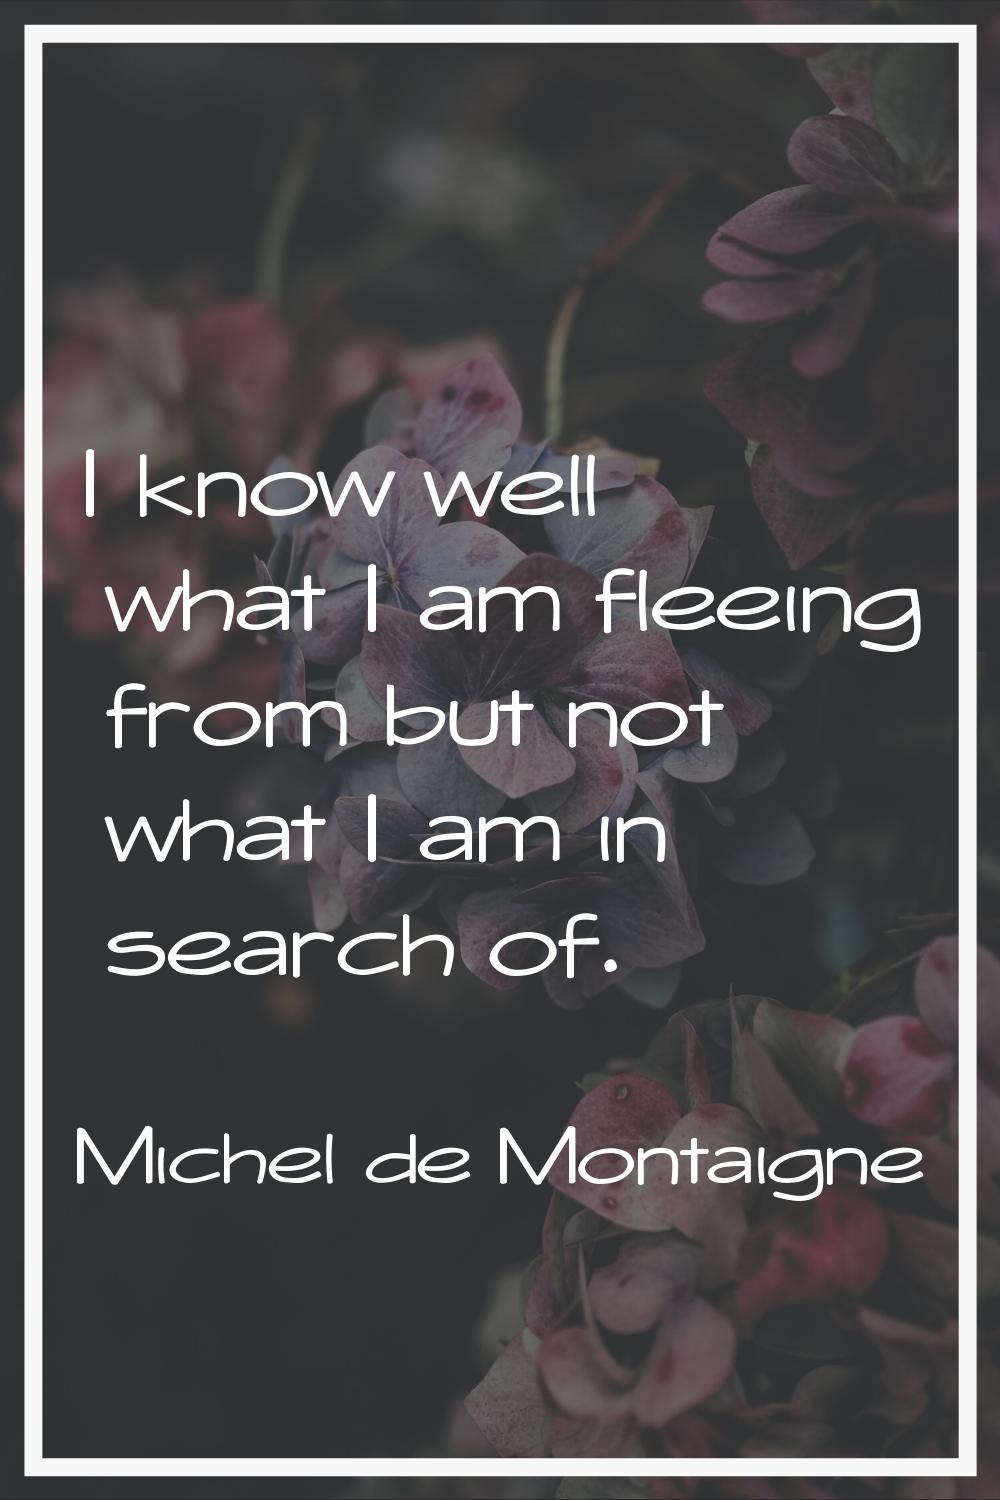 I know well what I am fleeing from but not what I am in search of.